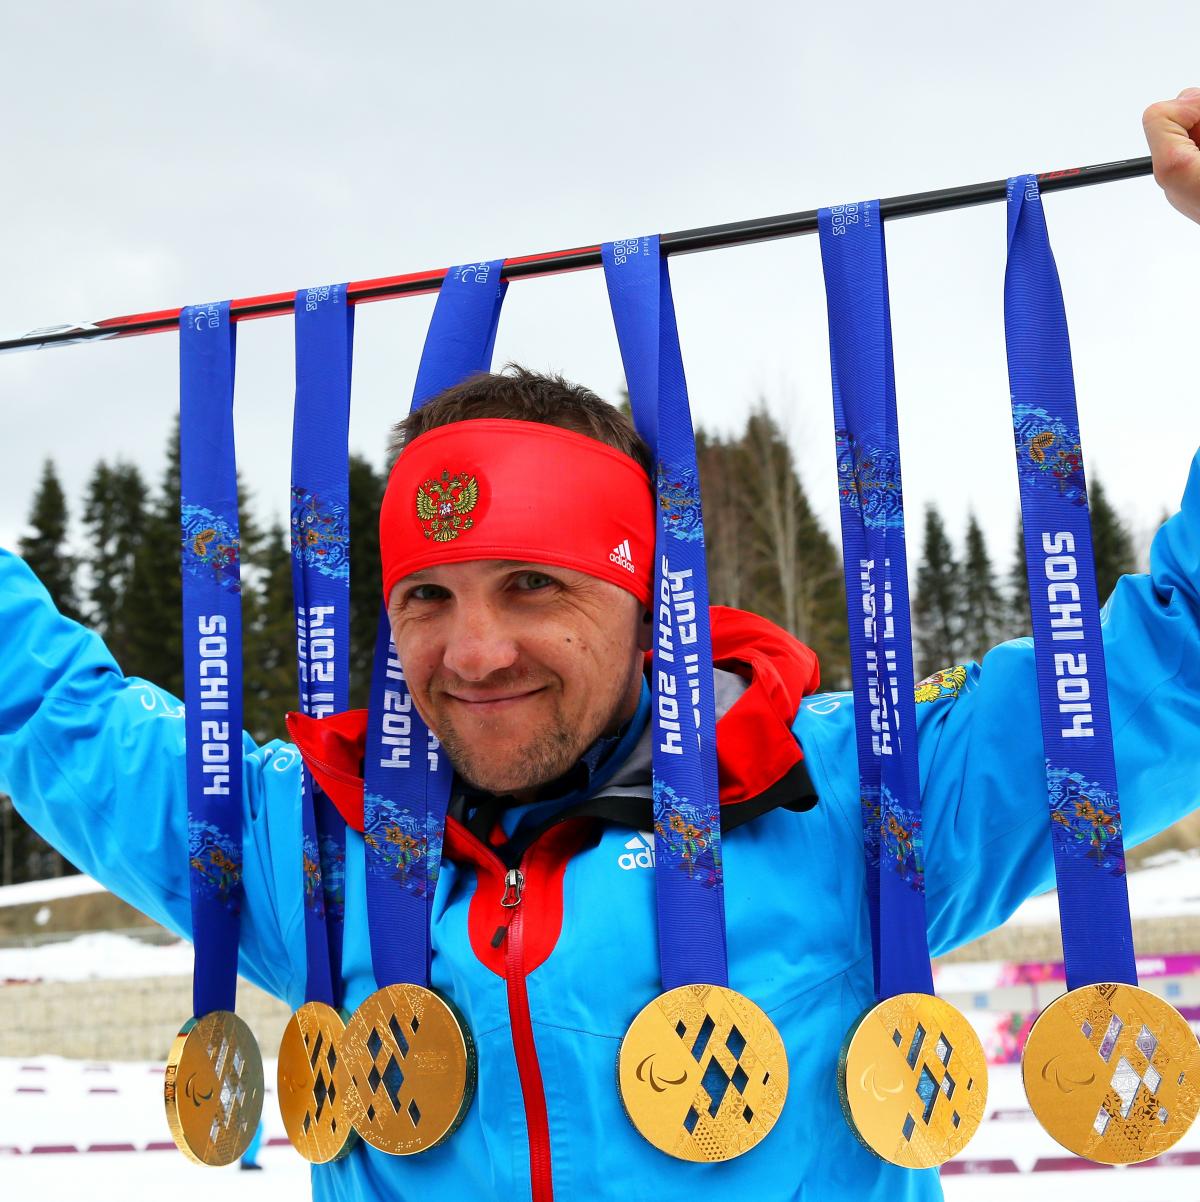 Roman Petushkov became the most decorated athlete at Sochi 2014 by winning six gold medals in biathlon and cross-country skiing.